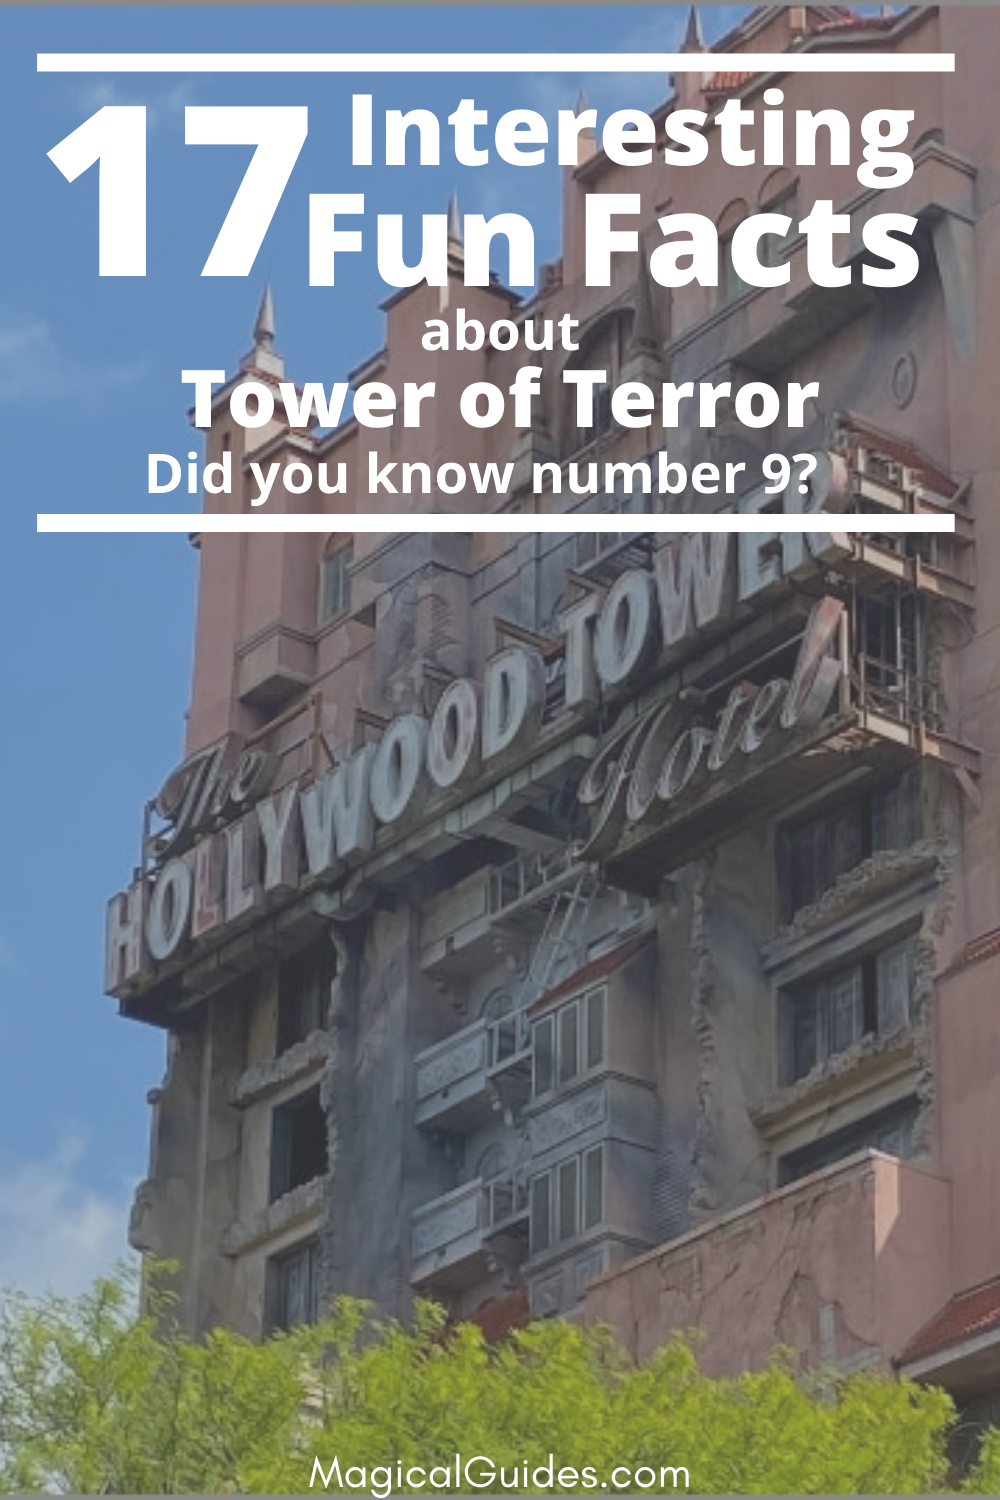 Here Are 17 Chilling Disney Fun Facts About Tower of Terror! You won't believe #9!